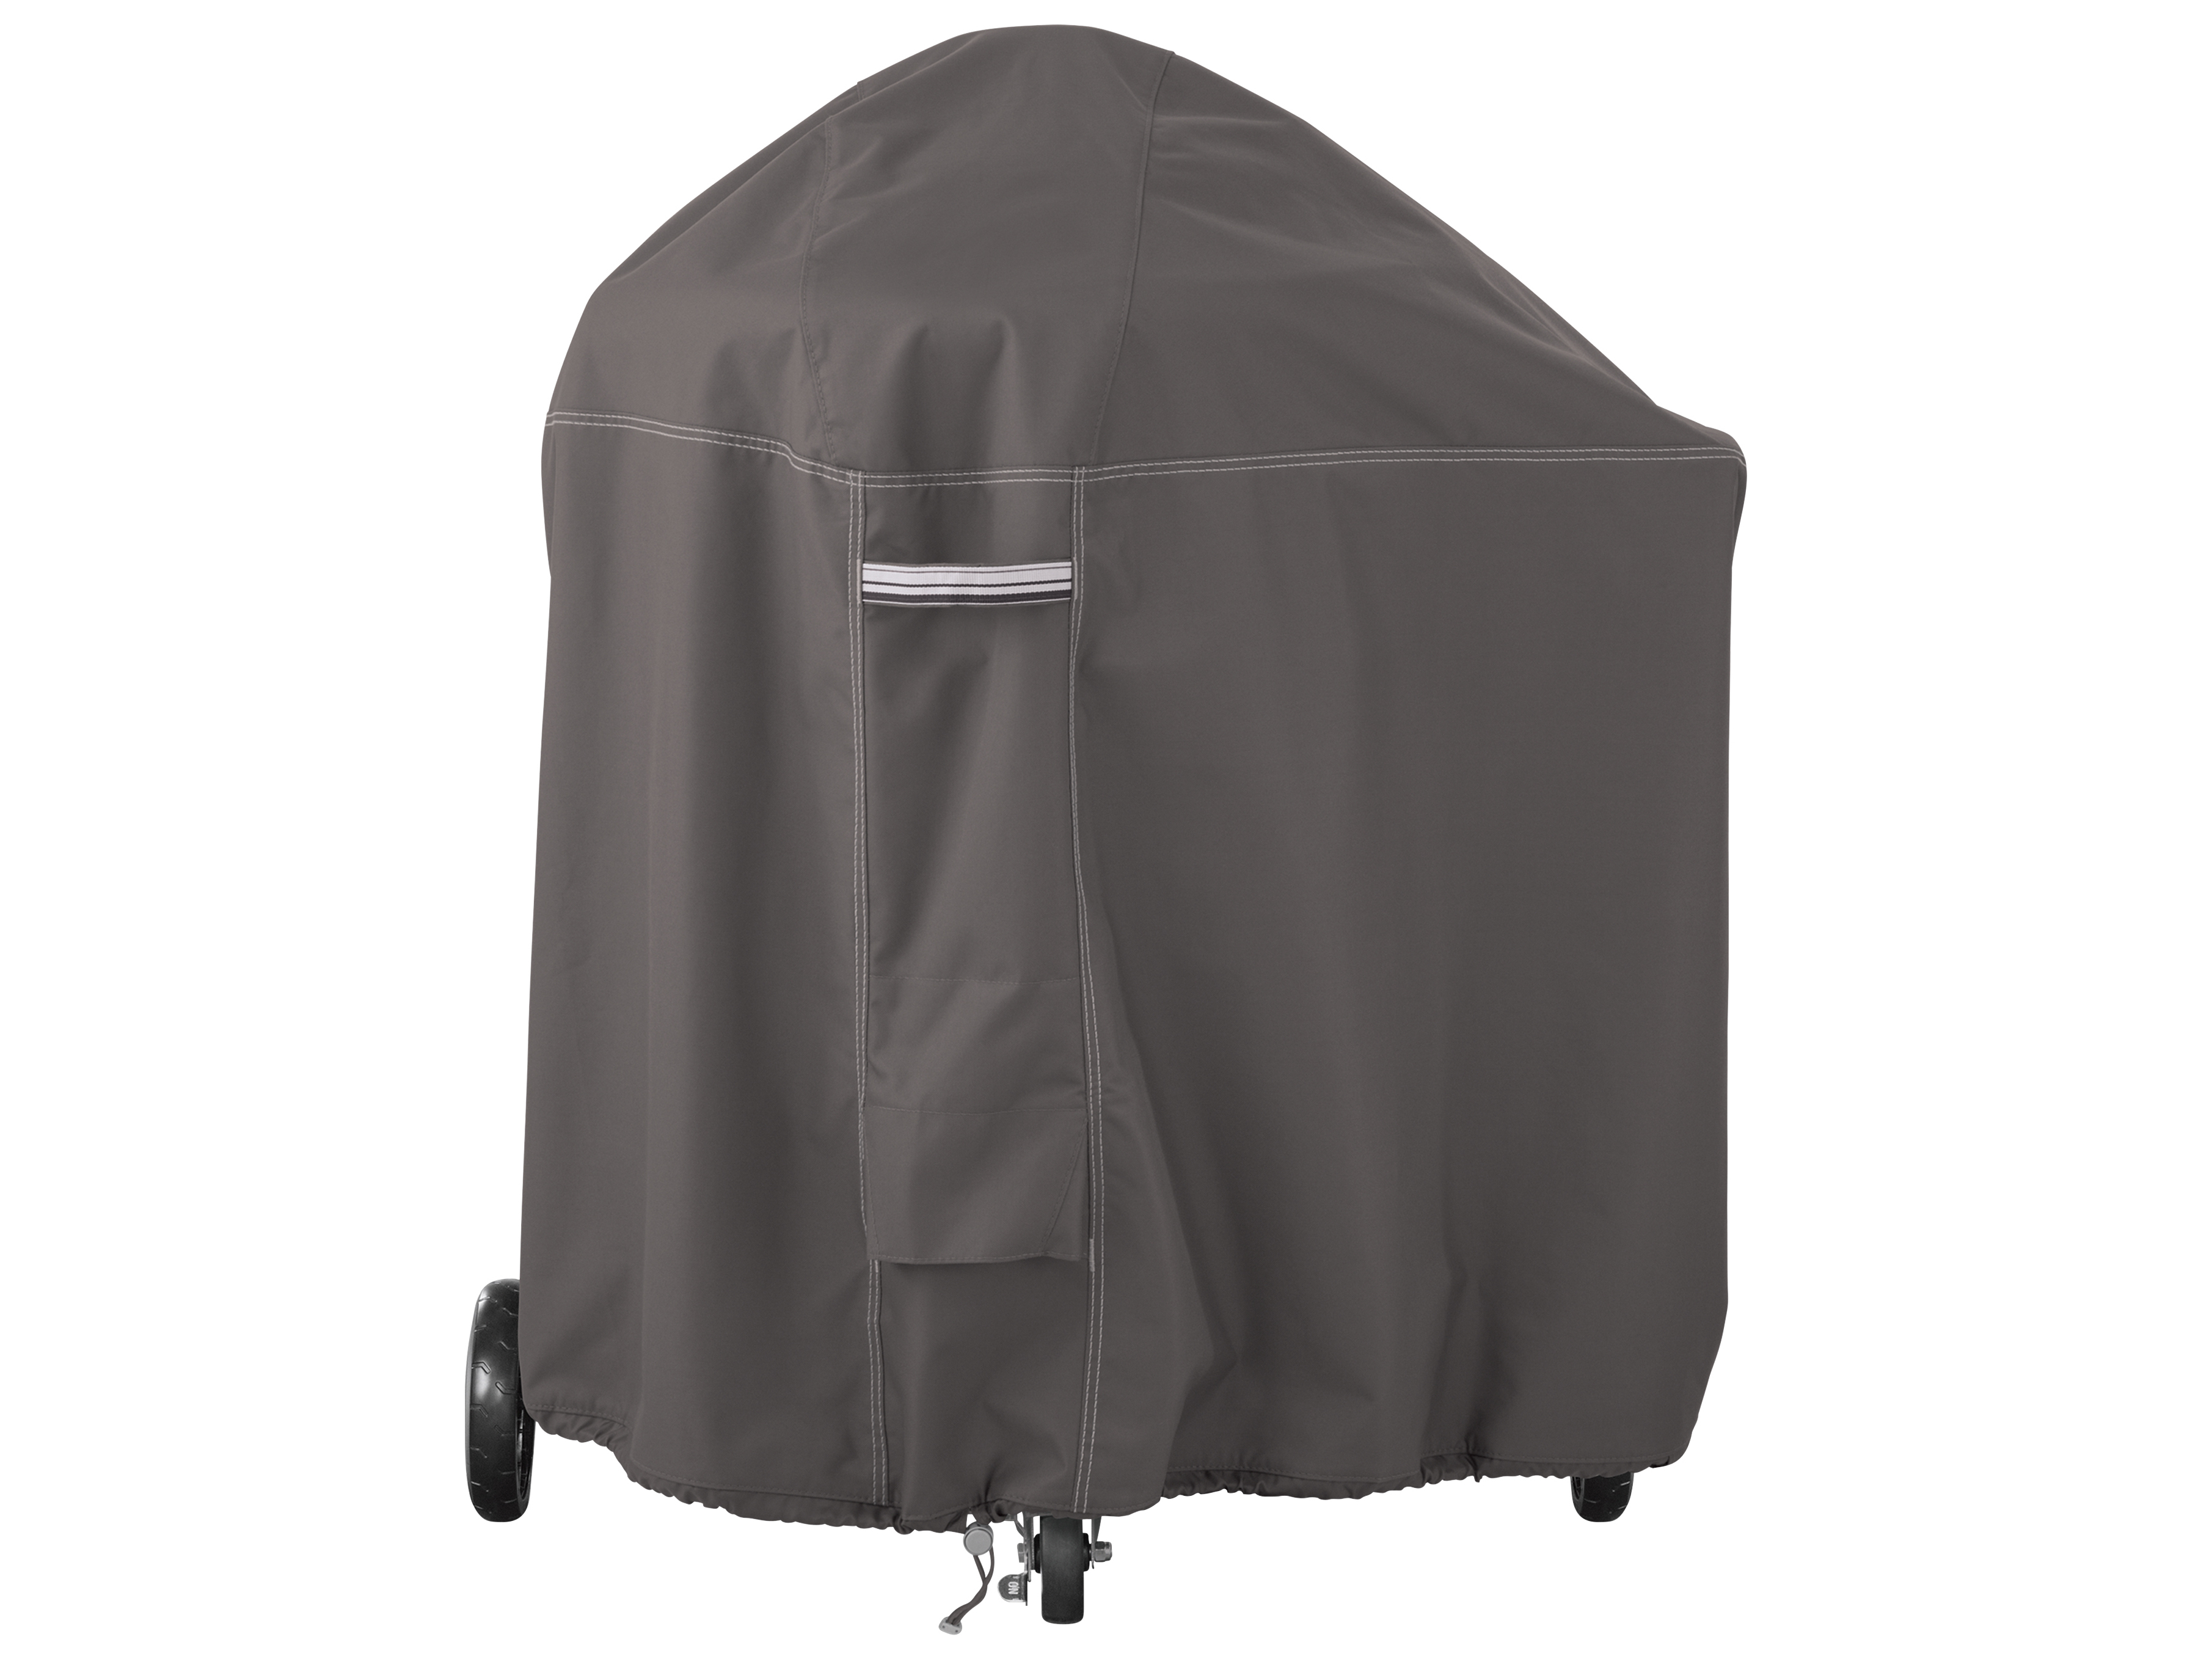 Duck Covers Ravenna Dark Taupe 110 Weber Summit Grill Cover DC55788015101EC